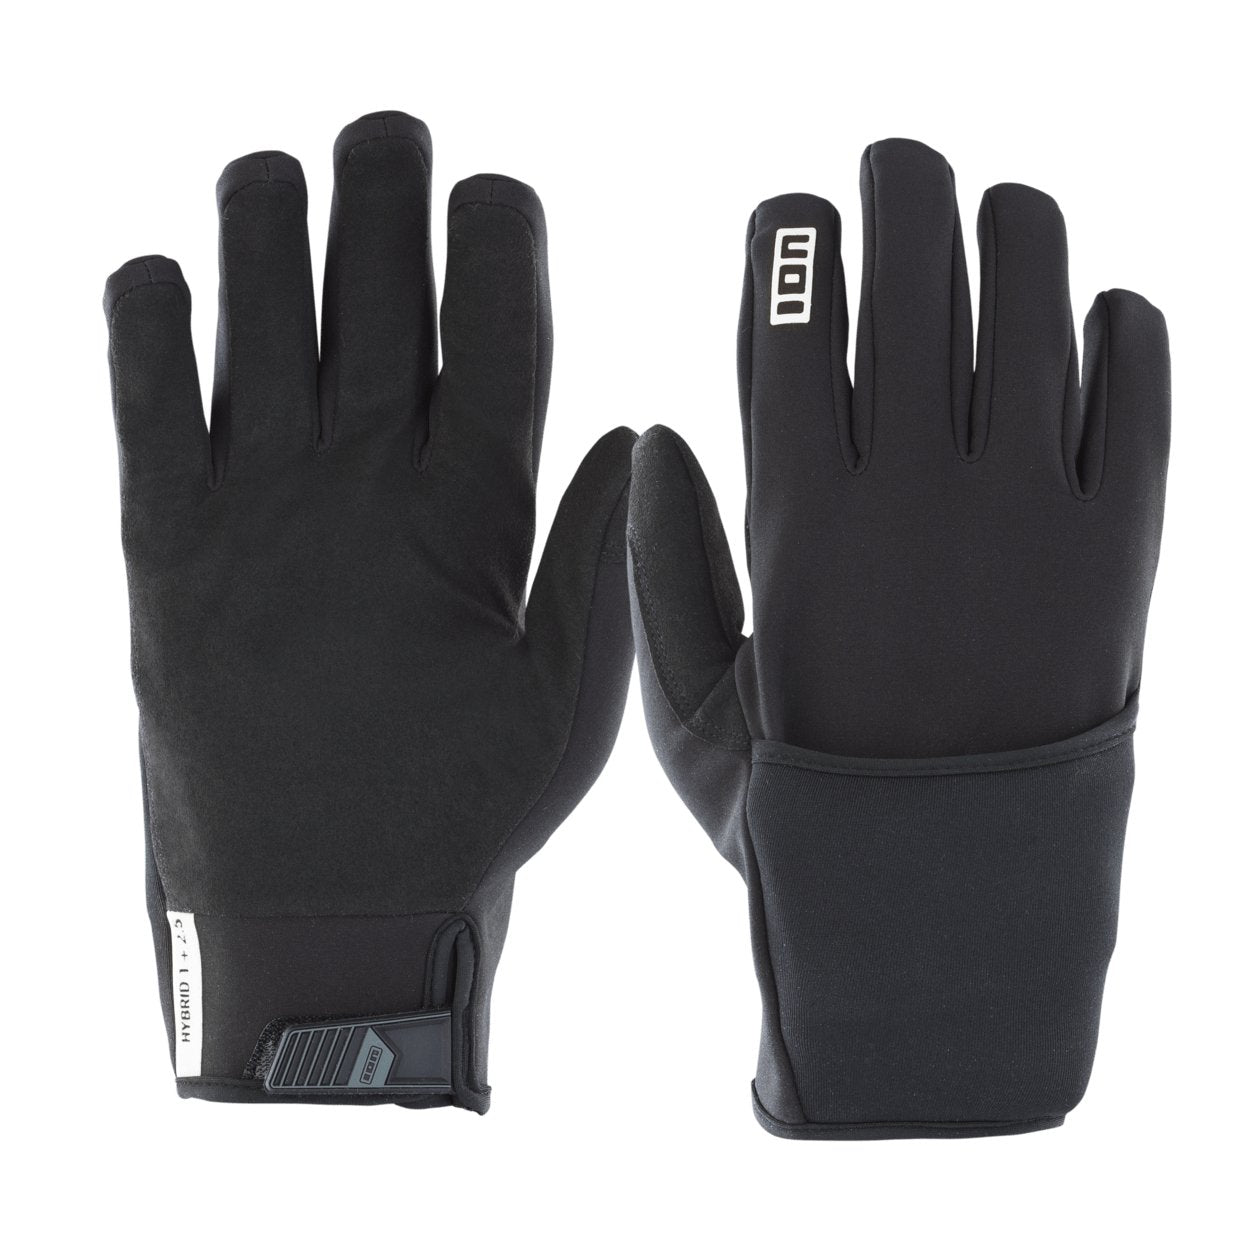 ION Hybrid Gloves 1+2.5 2024 - Worthing Watersports - 9010583138749 - Neo Accessories - ION Water